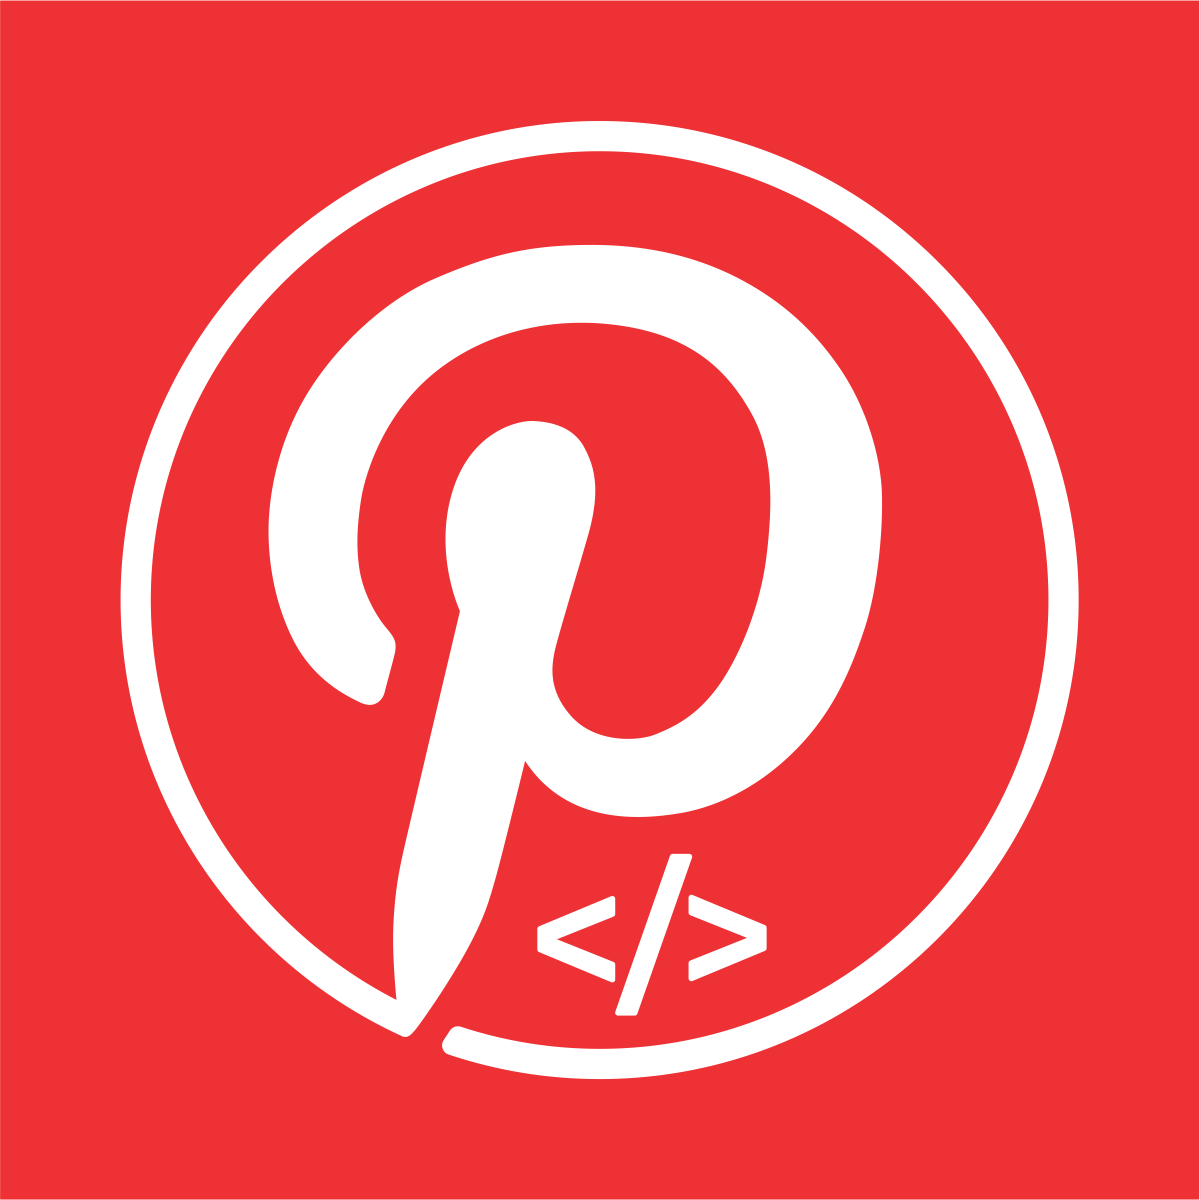 Hire Shopify Experts to integrate PinTrack â€‘ Pinterest Pixel Tag app into a Shopify store